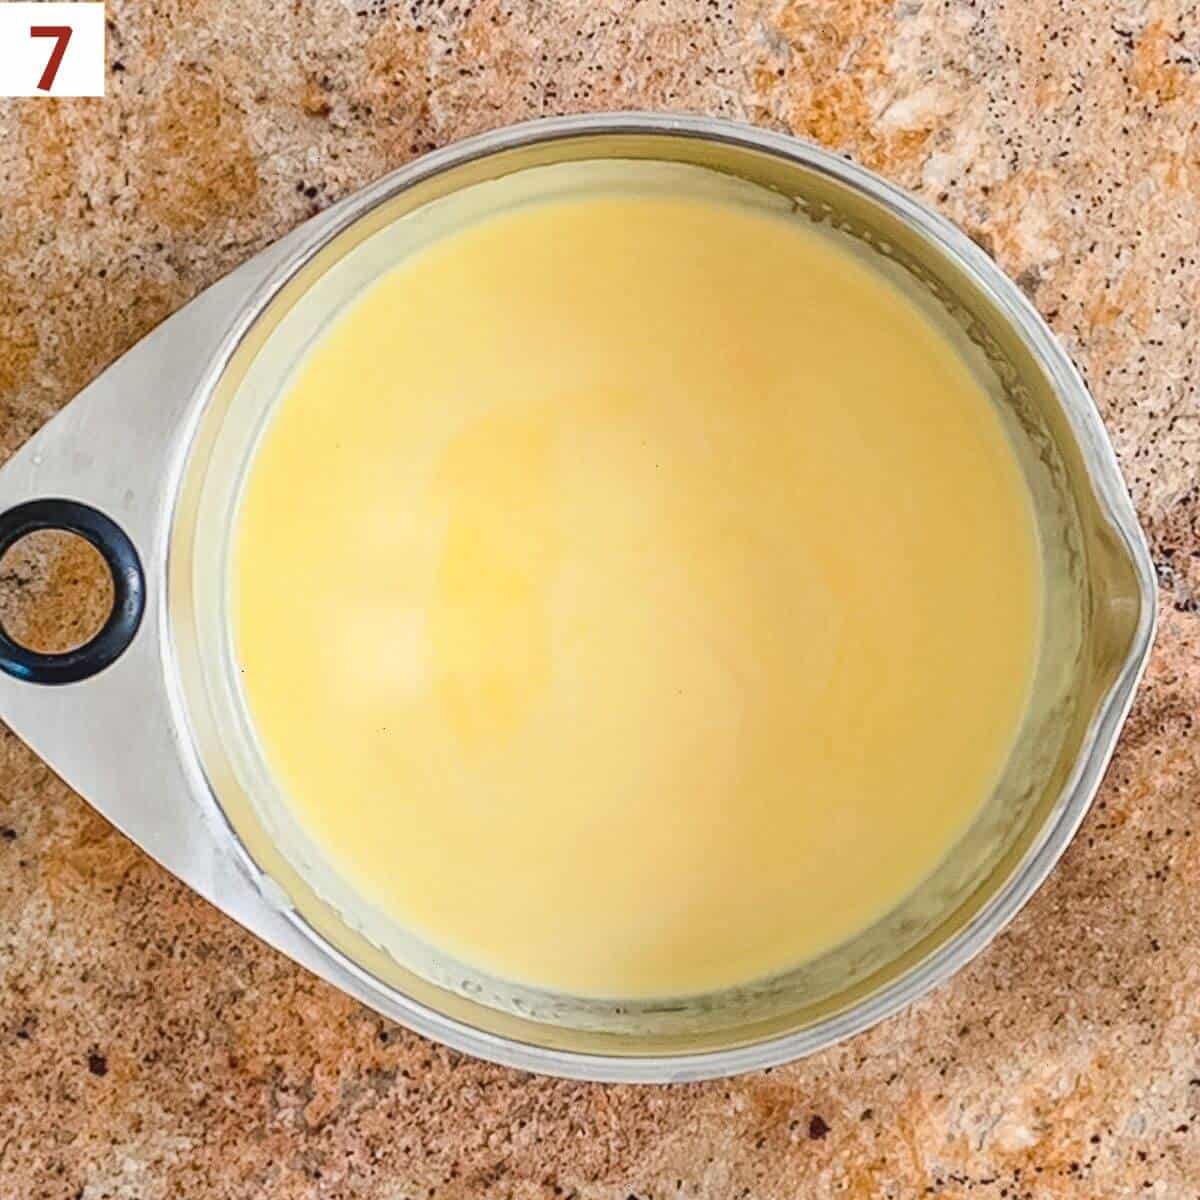 Cooled custard in a metal bowl ready to be chilled overnight.